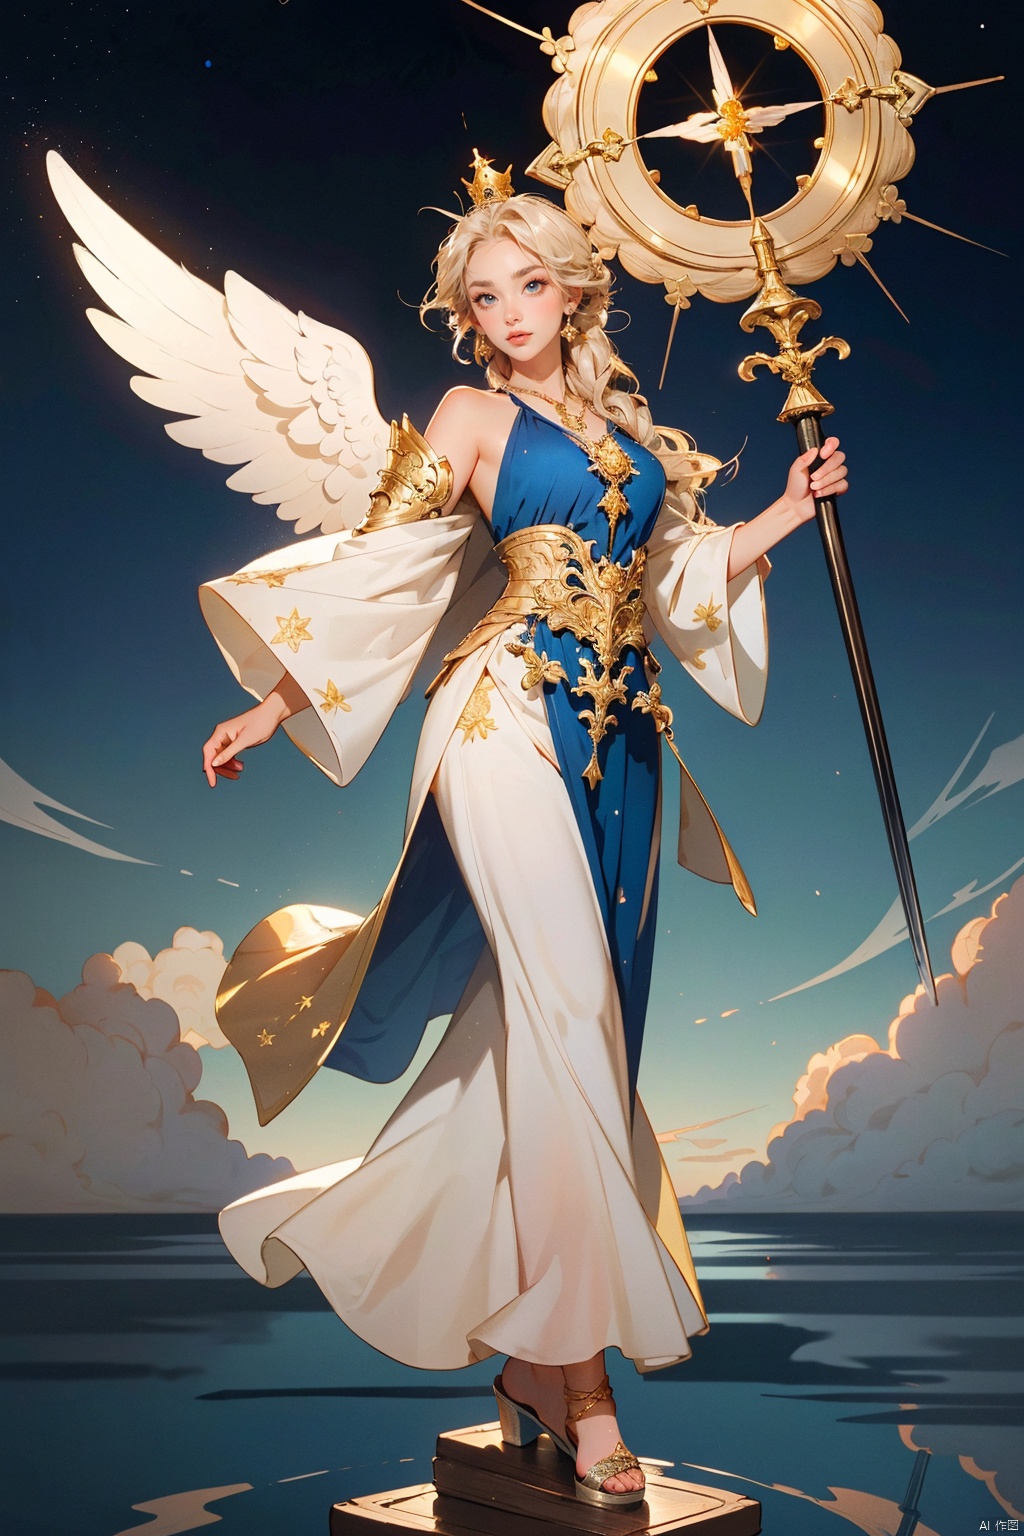 1girl, (angelic being with celestial grace), ((full body)), (radiant white wings outstretched and feathered in gold, emanating divine light), (wearing a flowing, ethereal gown of pure silk or gossamer that catches the heavenly light), (garment intricately detailed with silver embroidery depicting stars and constellations), (shoulder-length hair of platinum blonde, cascading in gentle waves around her face), (aloft on a cloud or radiant platform), (ethereally glowing aura surrounding her form), (holding a gleaming sword of righteousness or a shining harp strung with golden threads), (crown of softly glowing halos hovering above her head), (large, compassionate blue eyes framed by lashes like feathers), (clad in armor of celestial design - breastplate adorned with sacred symbols), (gauntlets and greaves subtly reflecting the divine radiance), (standing barefoot or wearing sandals of translucent crystal), (wearing a simple yet elegant pendant featuring a pearlescent teardrop gemstone), (a soft breeze lifting her hair and robes as if carried by unseen zephyrs), (background: sky-blue heavens with drifting clouds and beams of sunlight), (presence exuding purity, benevolence, and celestial protection)..(Masterpiece: 1.2), (Best Quality: 1.2), (High Resolution: 1.2), (Incredibly Ridiculous), (Absurd), Very High Resolution, Illustration,,((poakl)), ,(wide shot:0.95),(Dynamic pose:1.4),  backlight